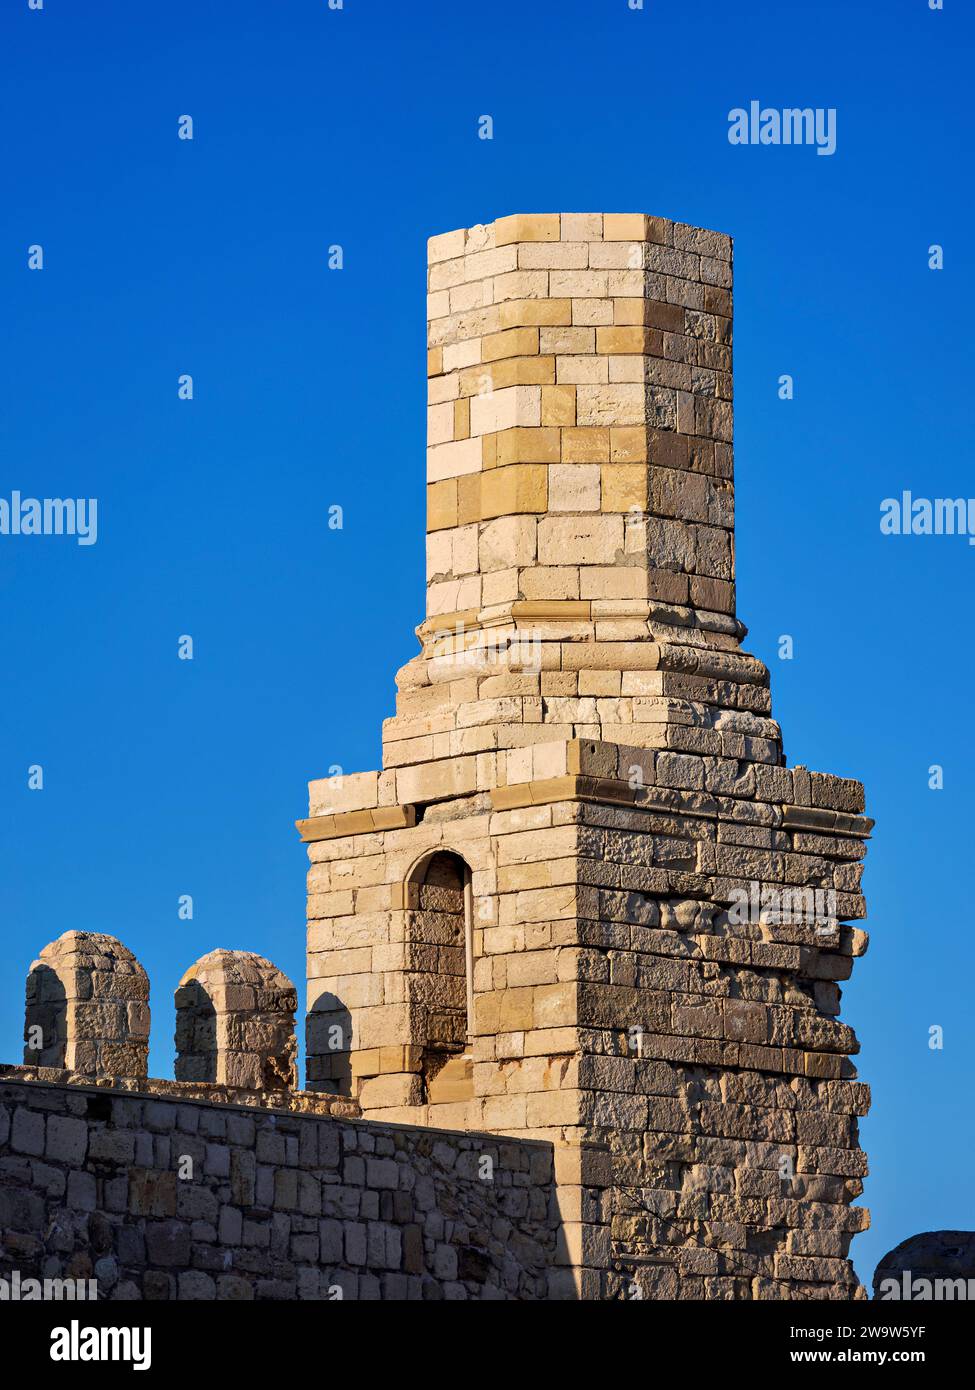 The Koules Fortress, detailed view, City of Heraklion, Crete, Greece Stock Photo